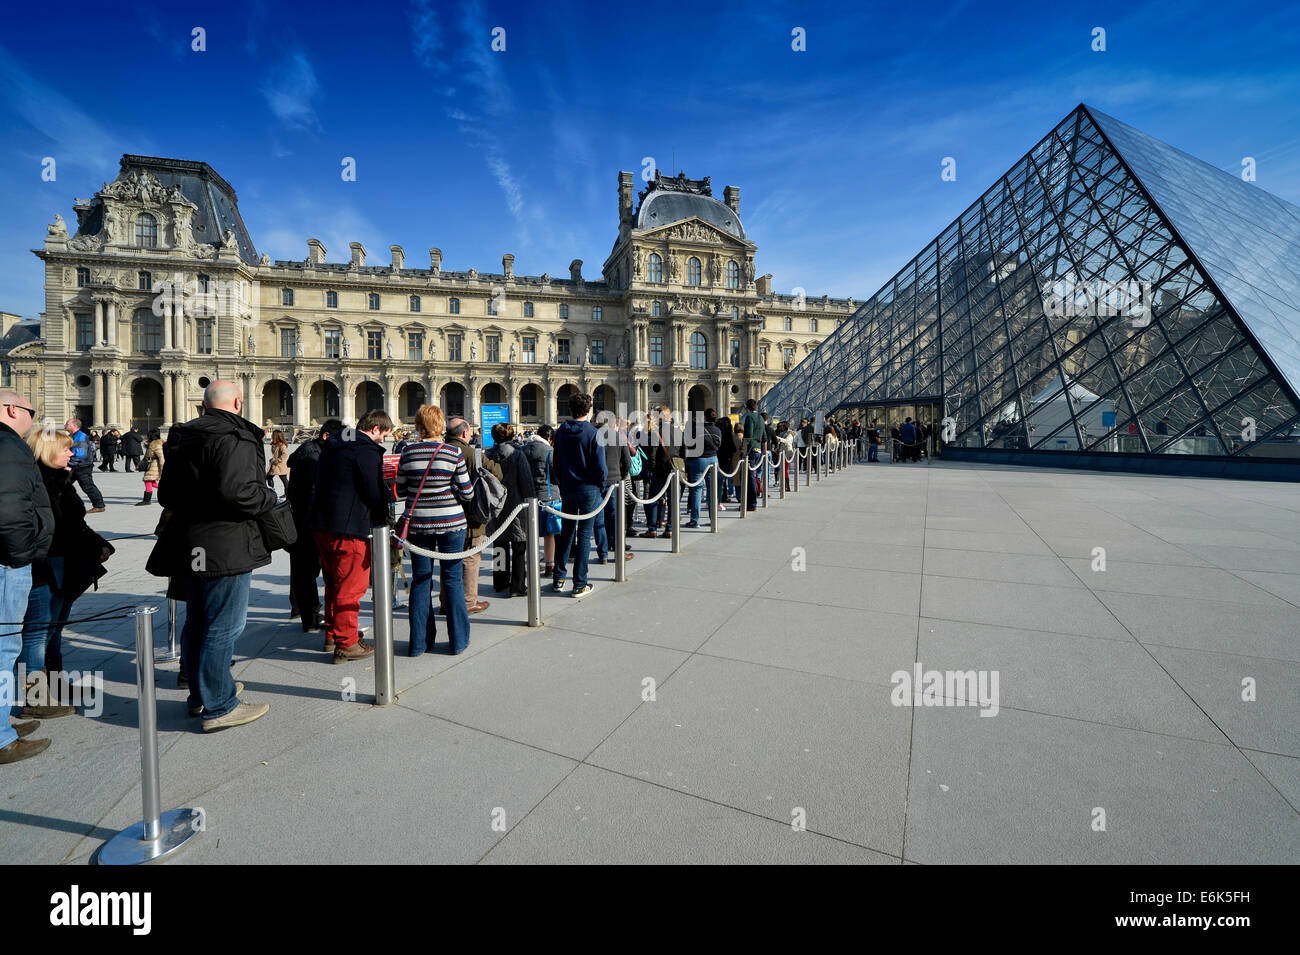 Queue in front of the entrance pyramid of the Louvre Museum designed by architect IM Pei, Musée du Louvre, Paris Stock Photo